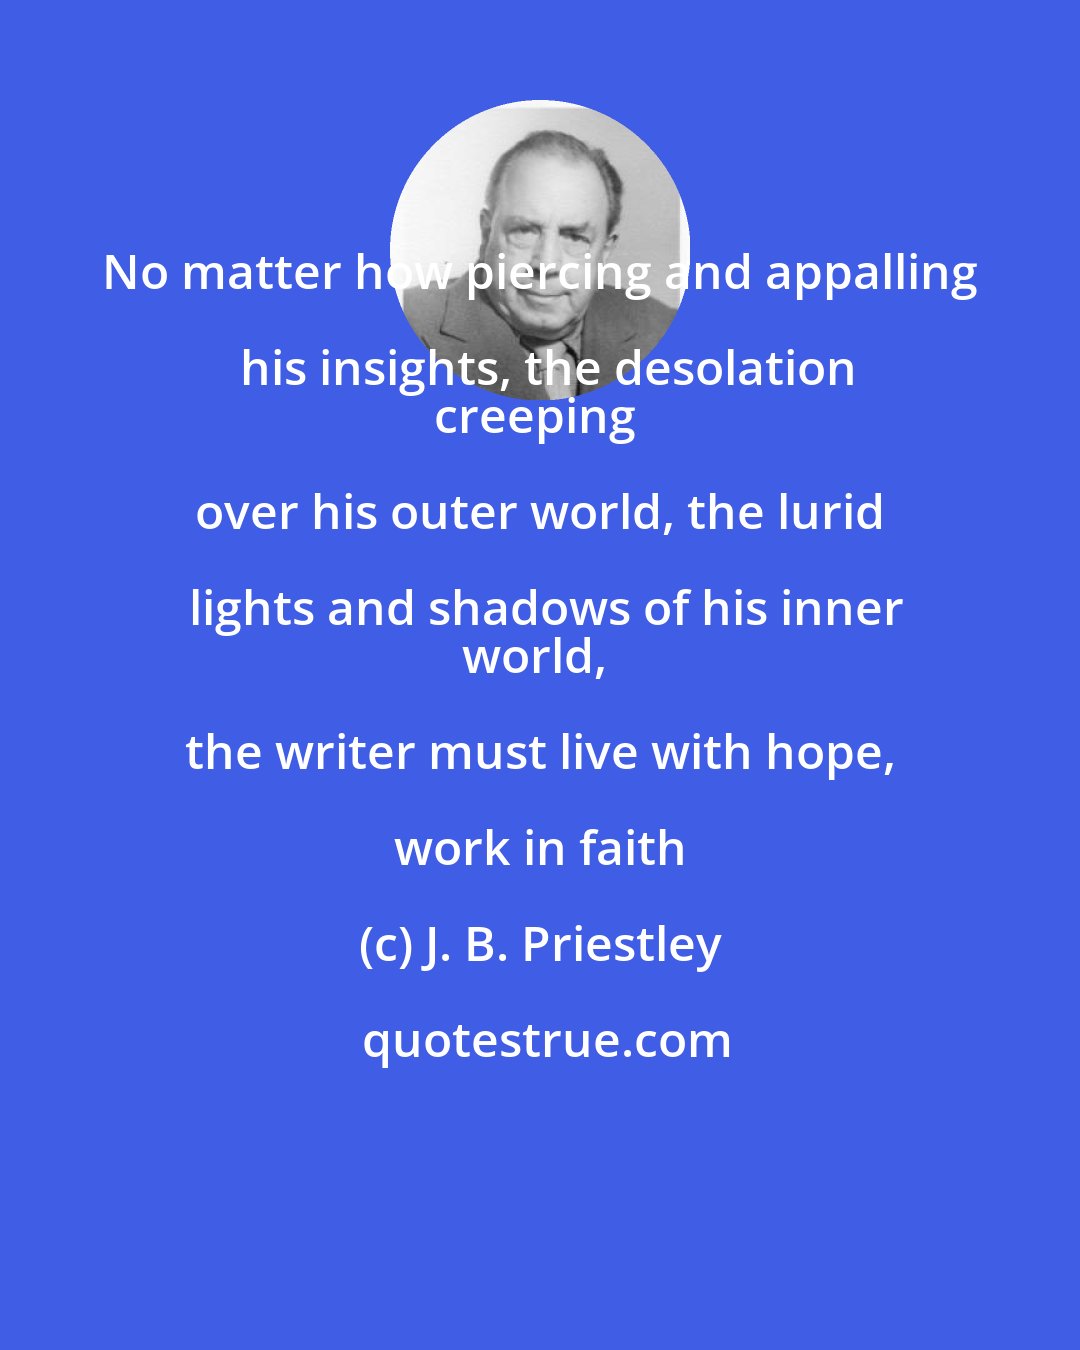 J. B. Priestley: No matter how piercing and appalling his insights, the desolation
creeping over his outer world, the lurid lights and shadows of his inner
world, the writer must live with hope, work in faith